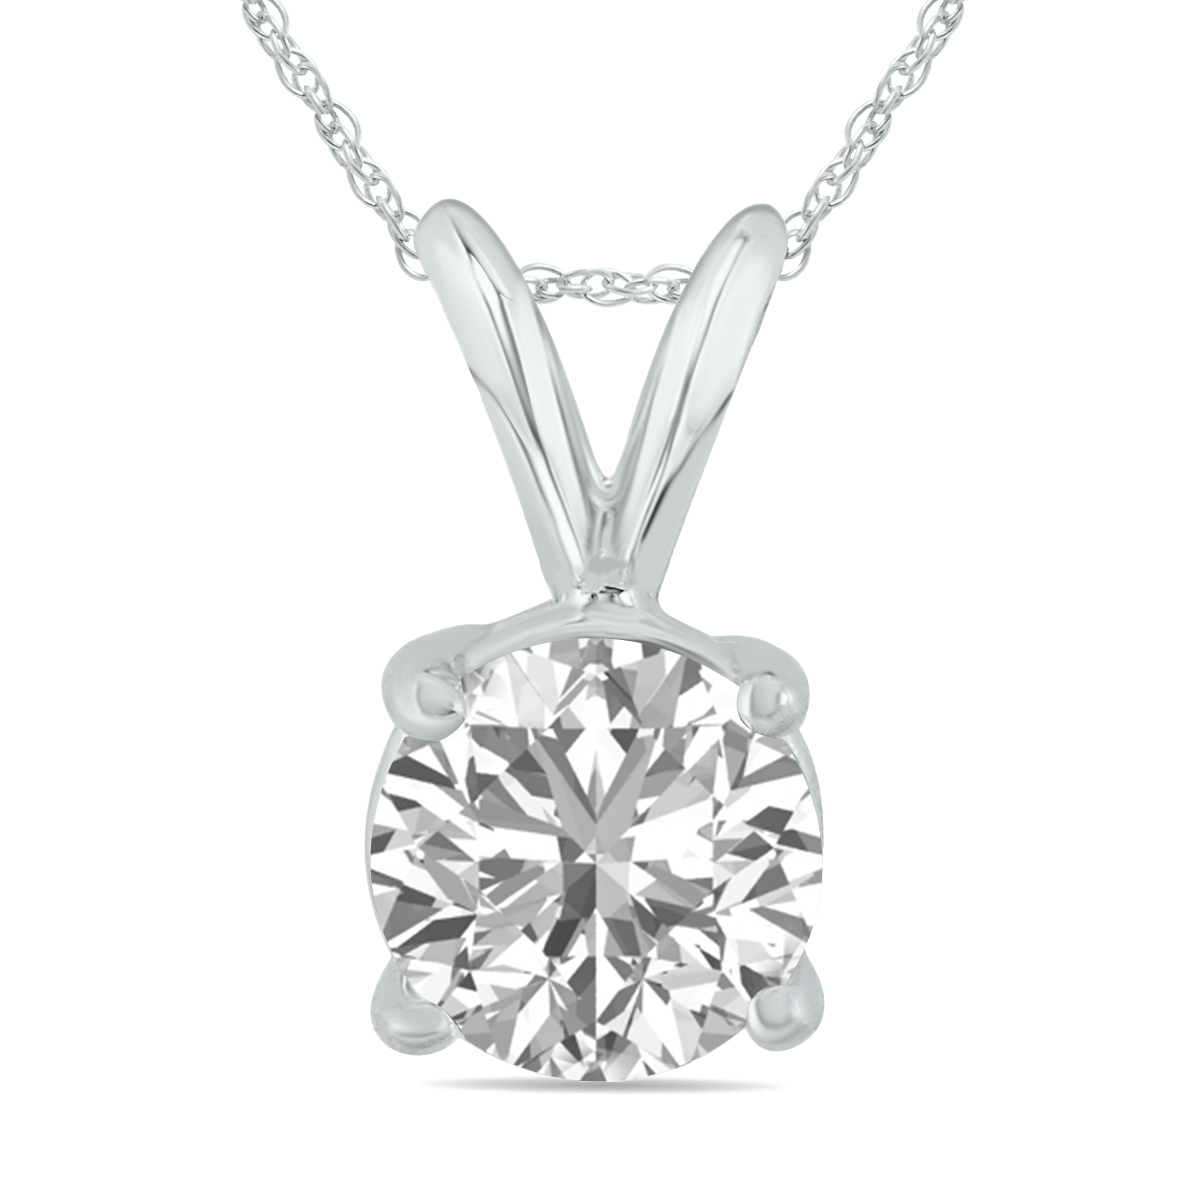 Image of IGI Certified Lab Grown 1 1/10 Carat Diamond Solitaire Pendant in 14K White Gold (J Color SI1 Clarity)